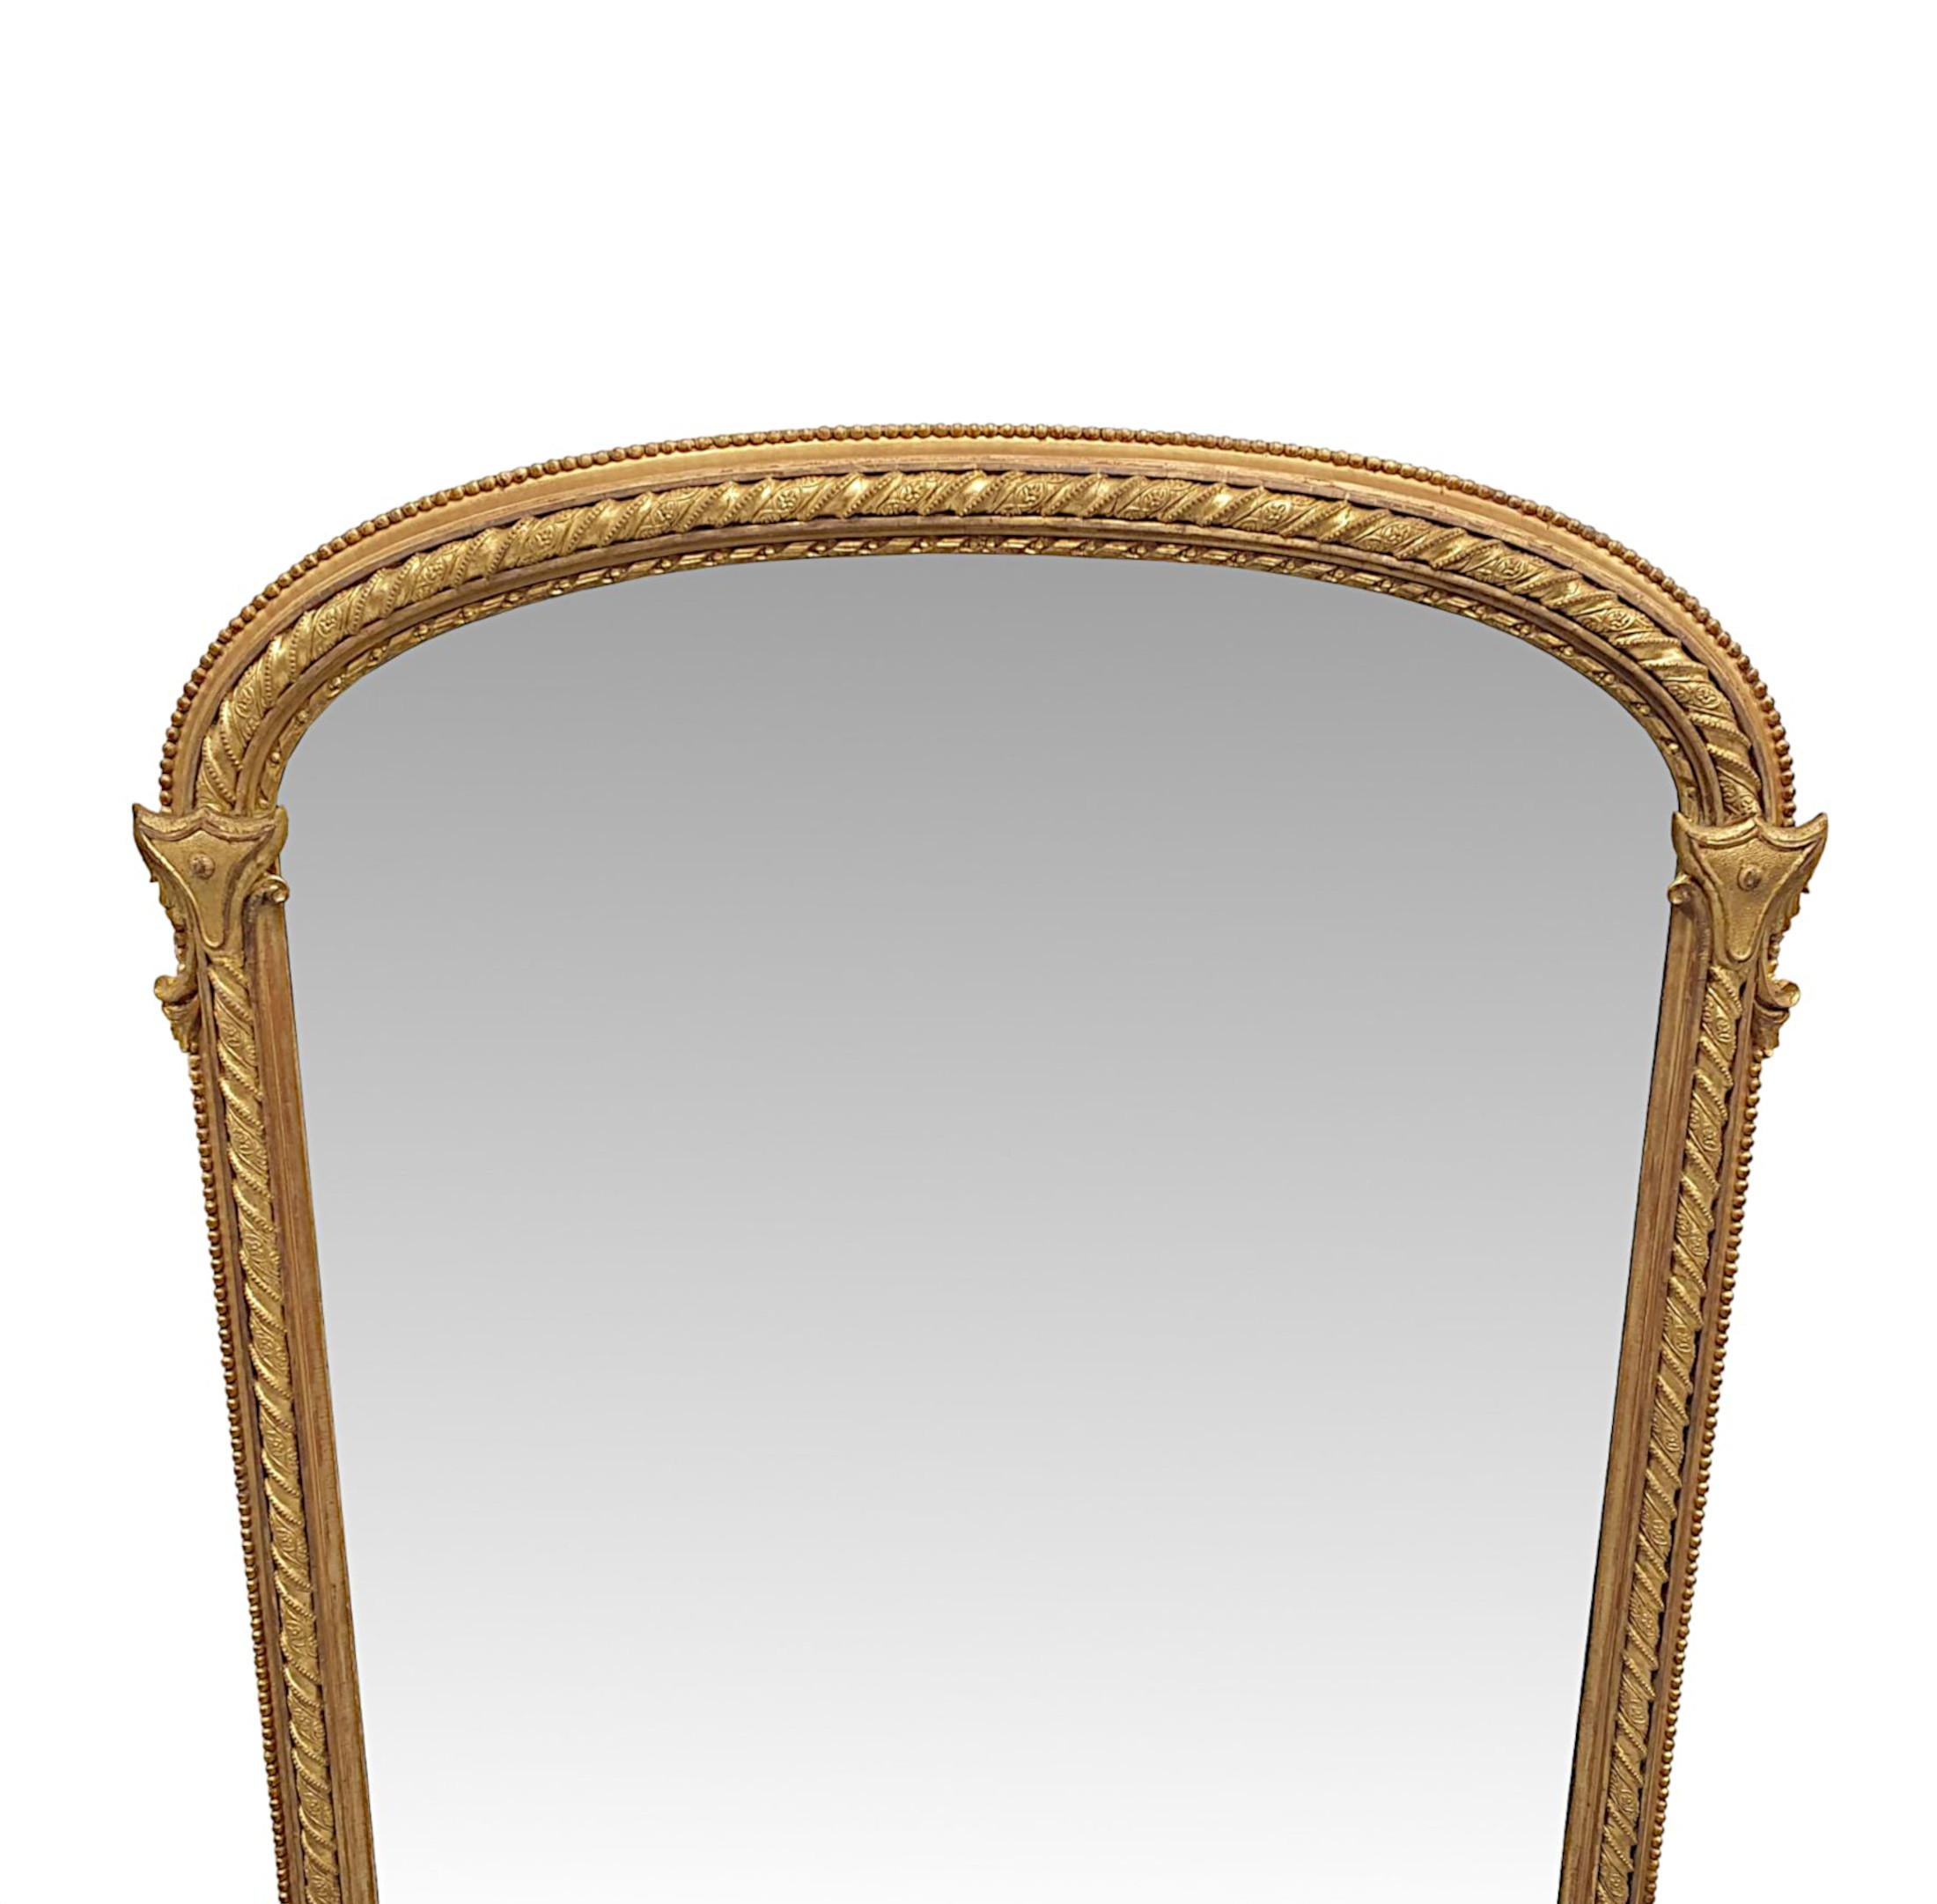 A very rare and fine 19th Century gilt wood overmantel mirror of grand proportions and exceptional quality. The mirror glass plate of rectangular form with an arched top is set within a fabulously hand carved, moulded and fluted giltwood frame with